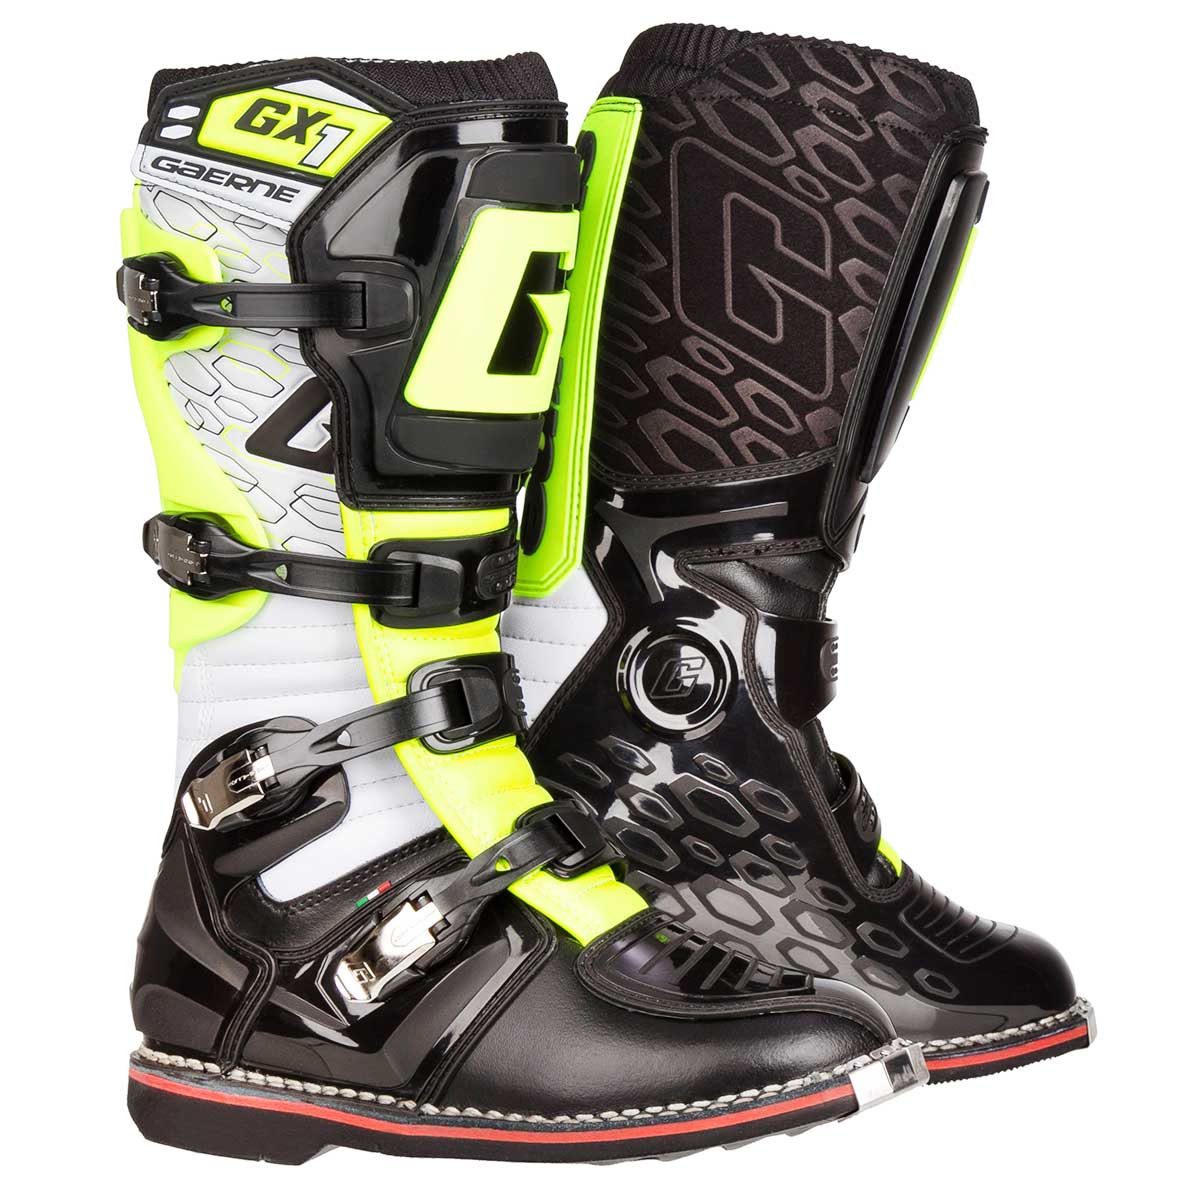 GAERNE GX1 WHITE MX BOOTS GOODYEAR SOLE MOTORCROSS MOTO-X OFF ROAD BOOTS 